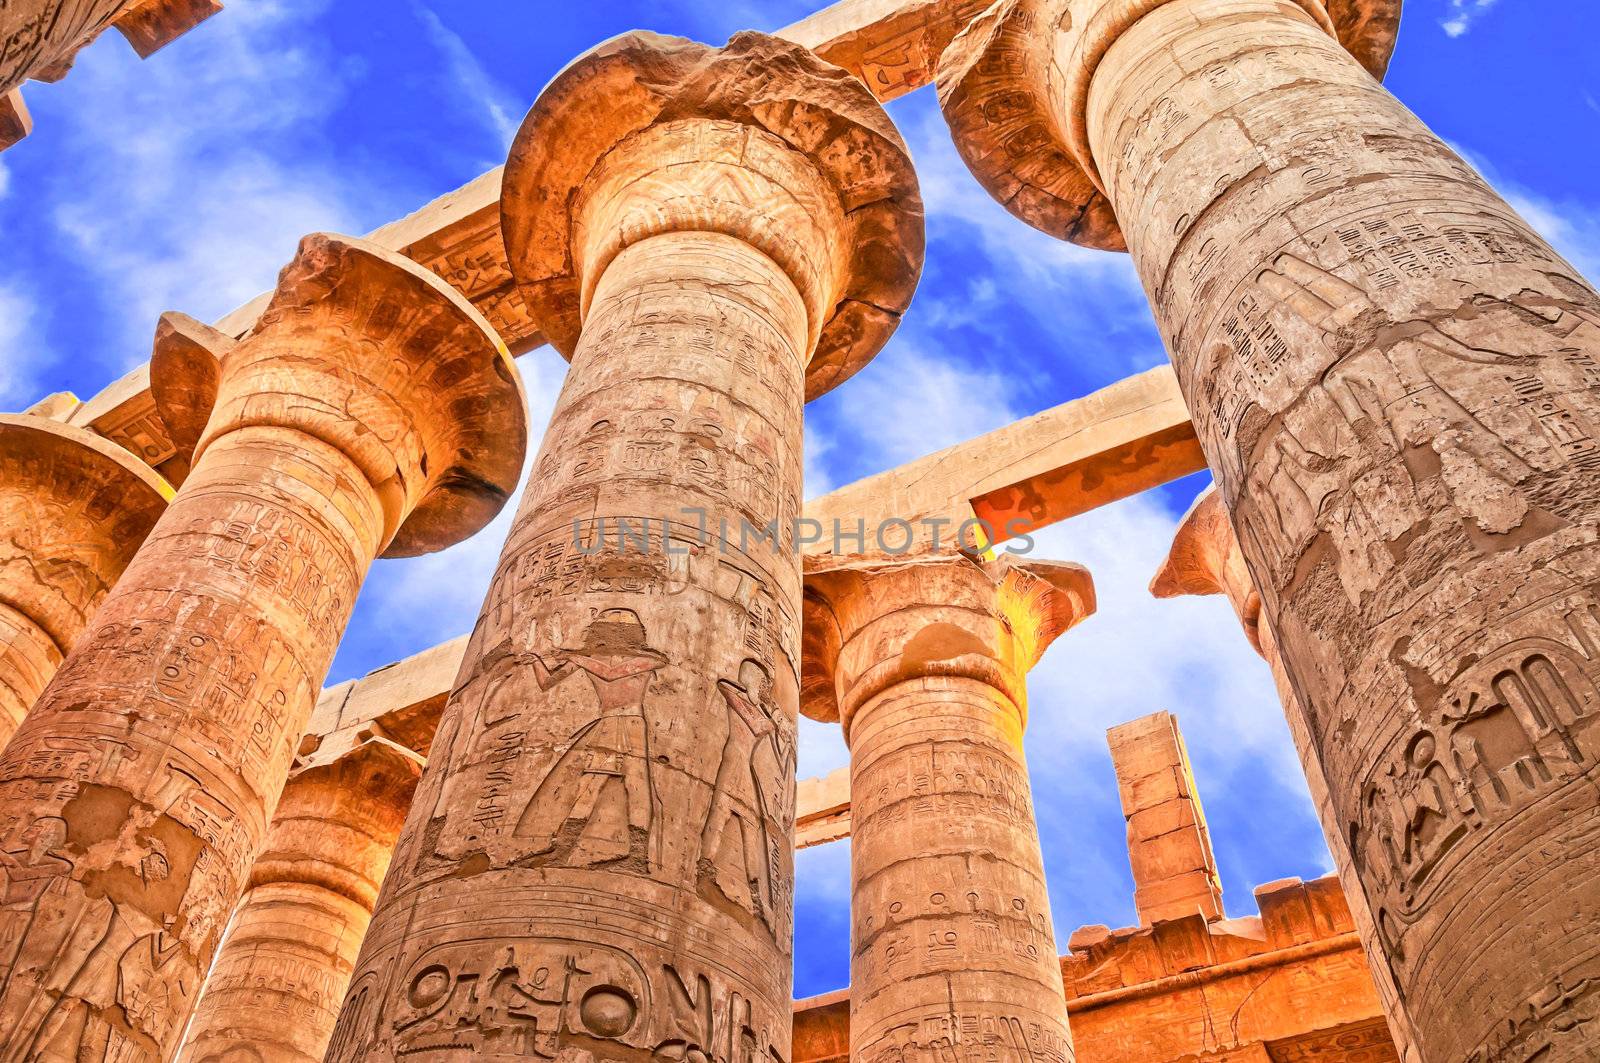 Great Hypostyle Hall and clouds at Karnak, Egypt by martinm303